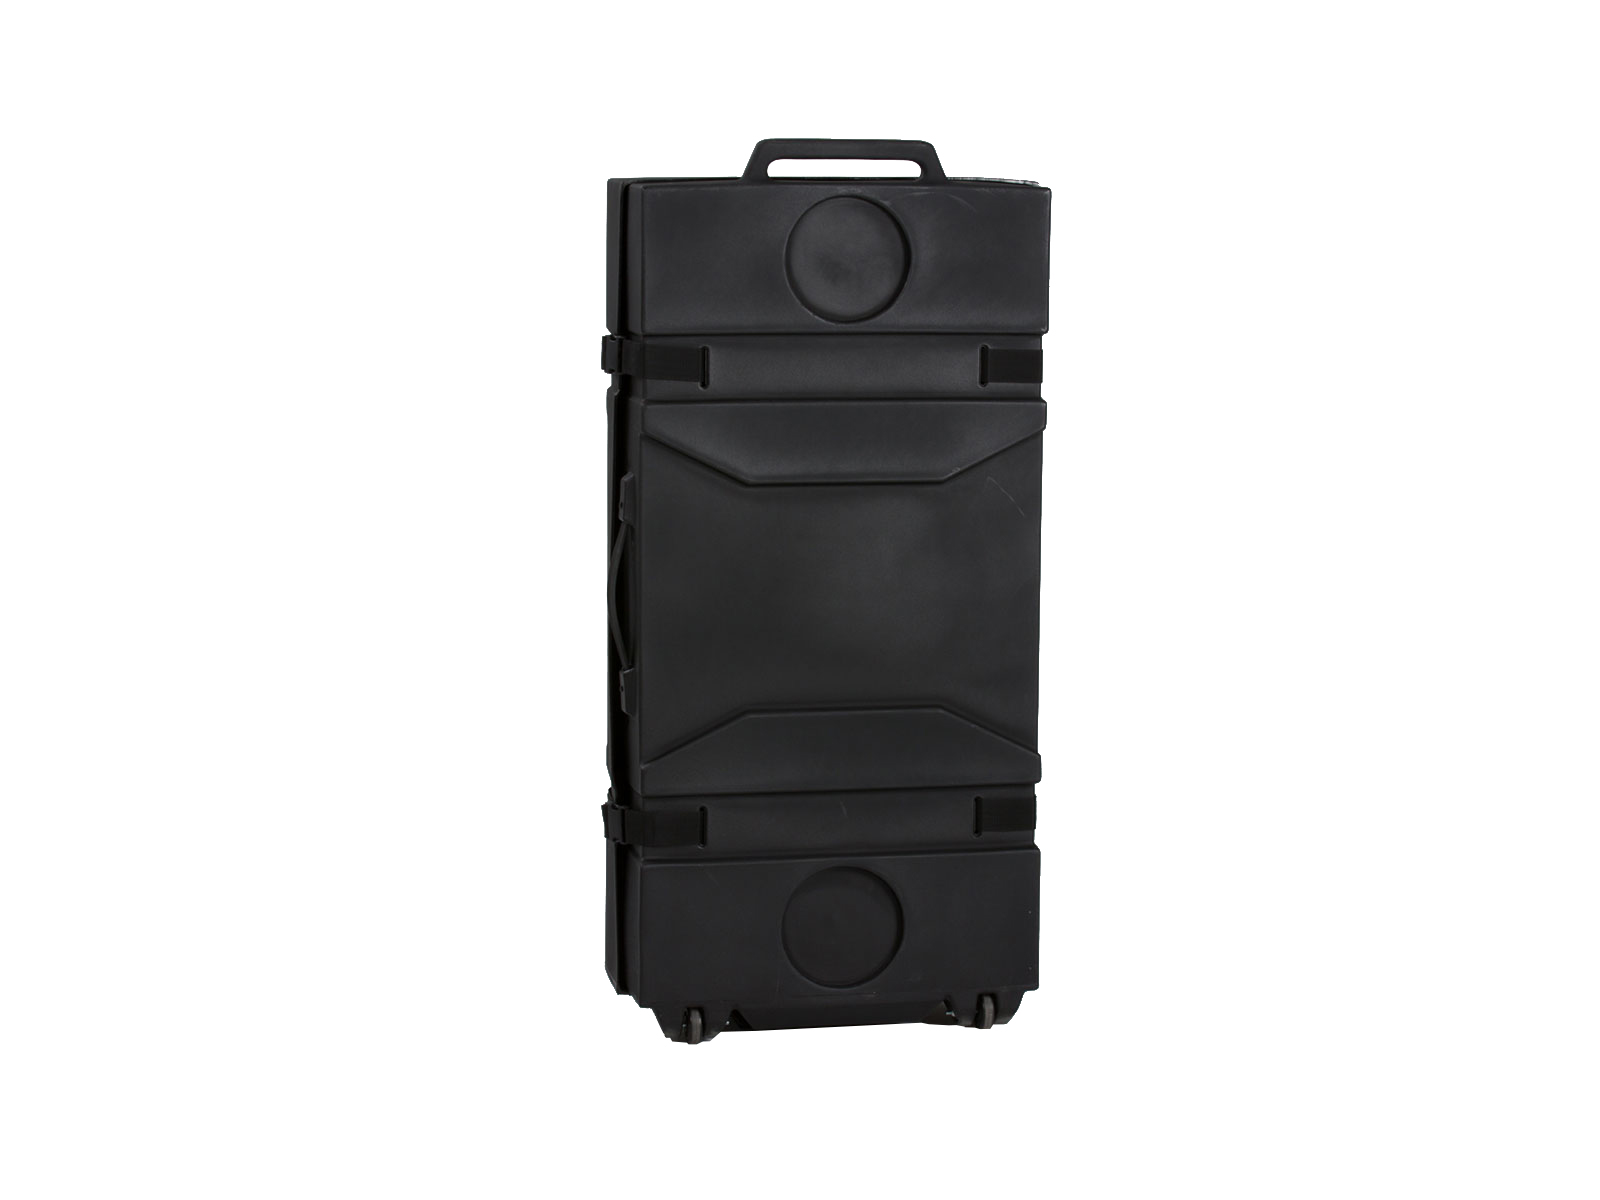 Portable Roto-molded Case with Wheels